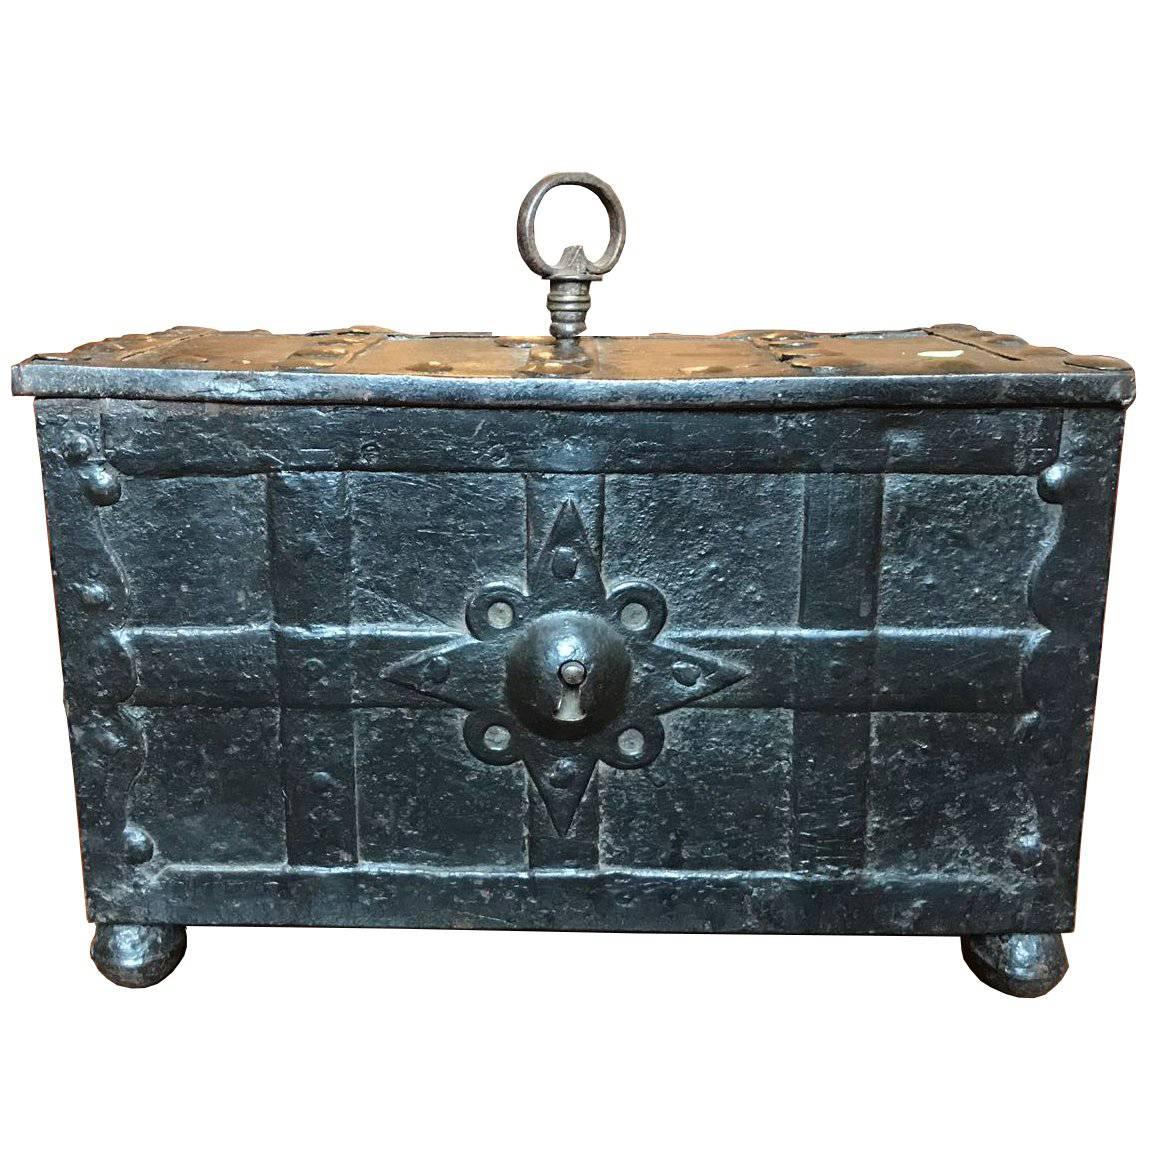 Early 17th Century Medieval Handcrafted Black Iron German Coffer